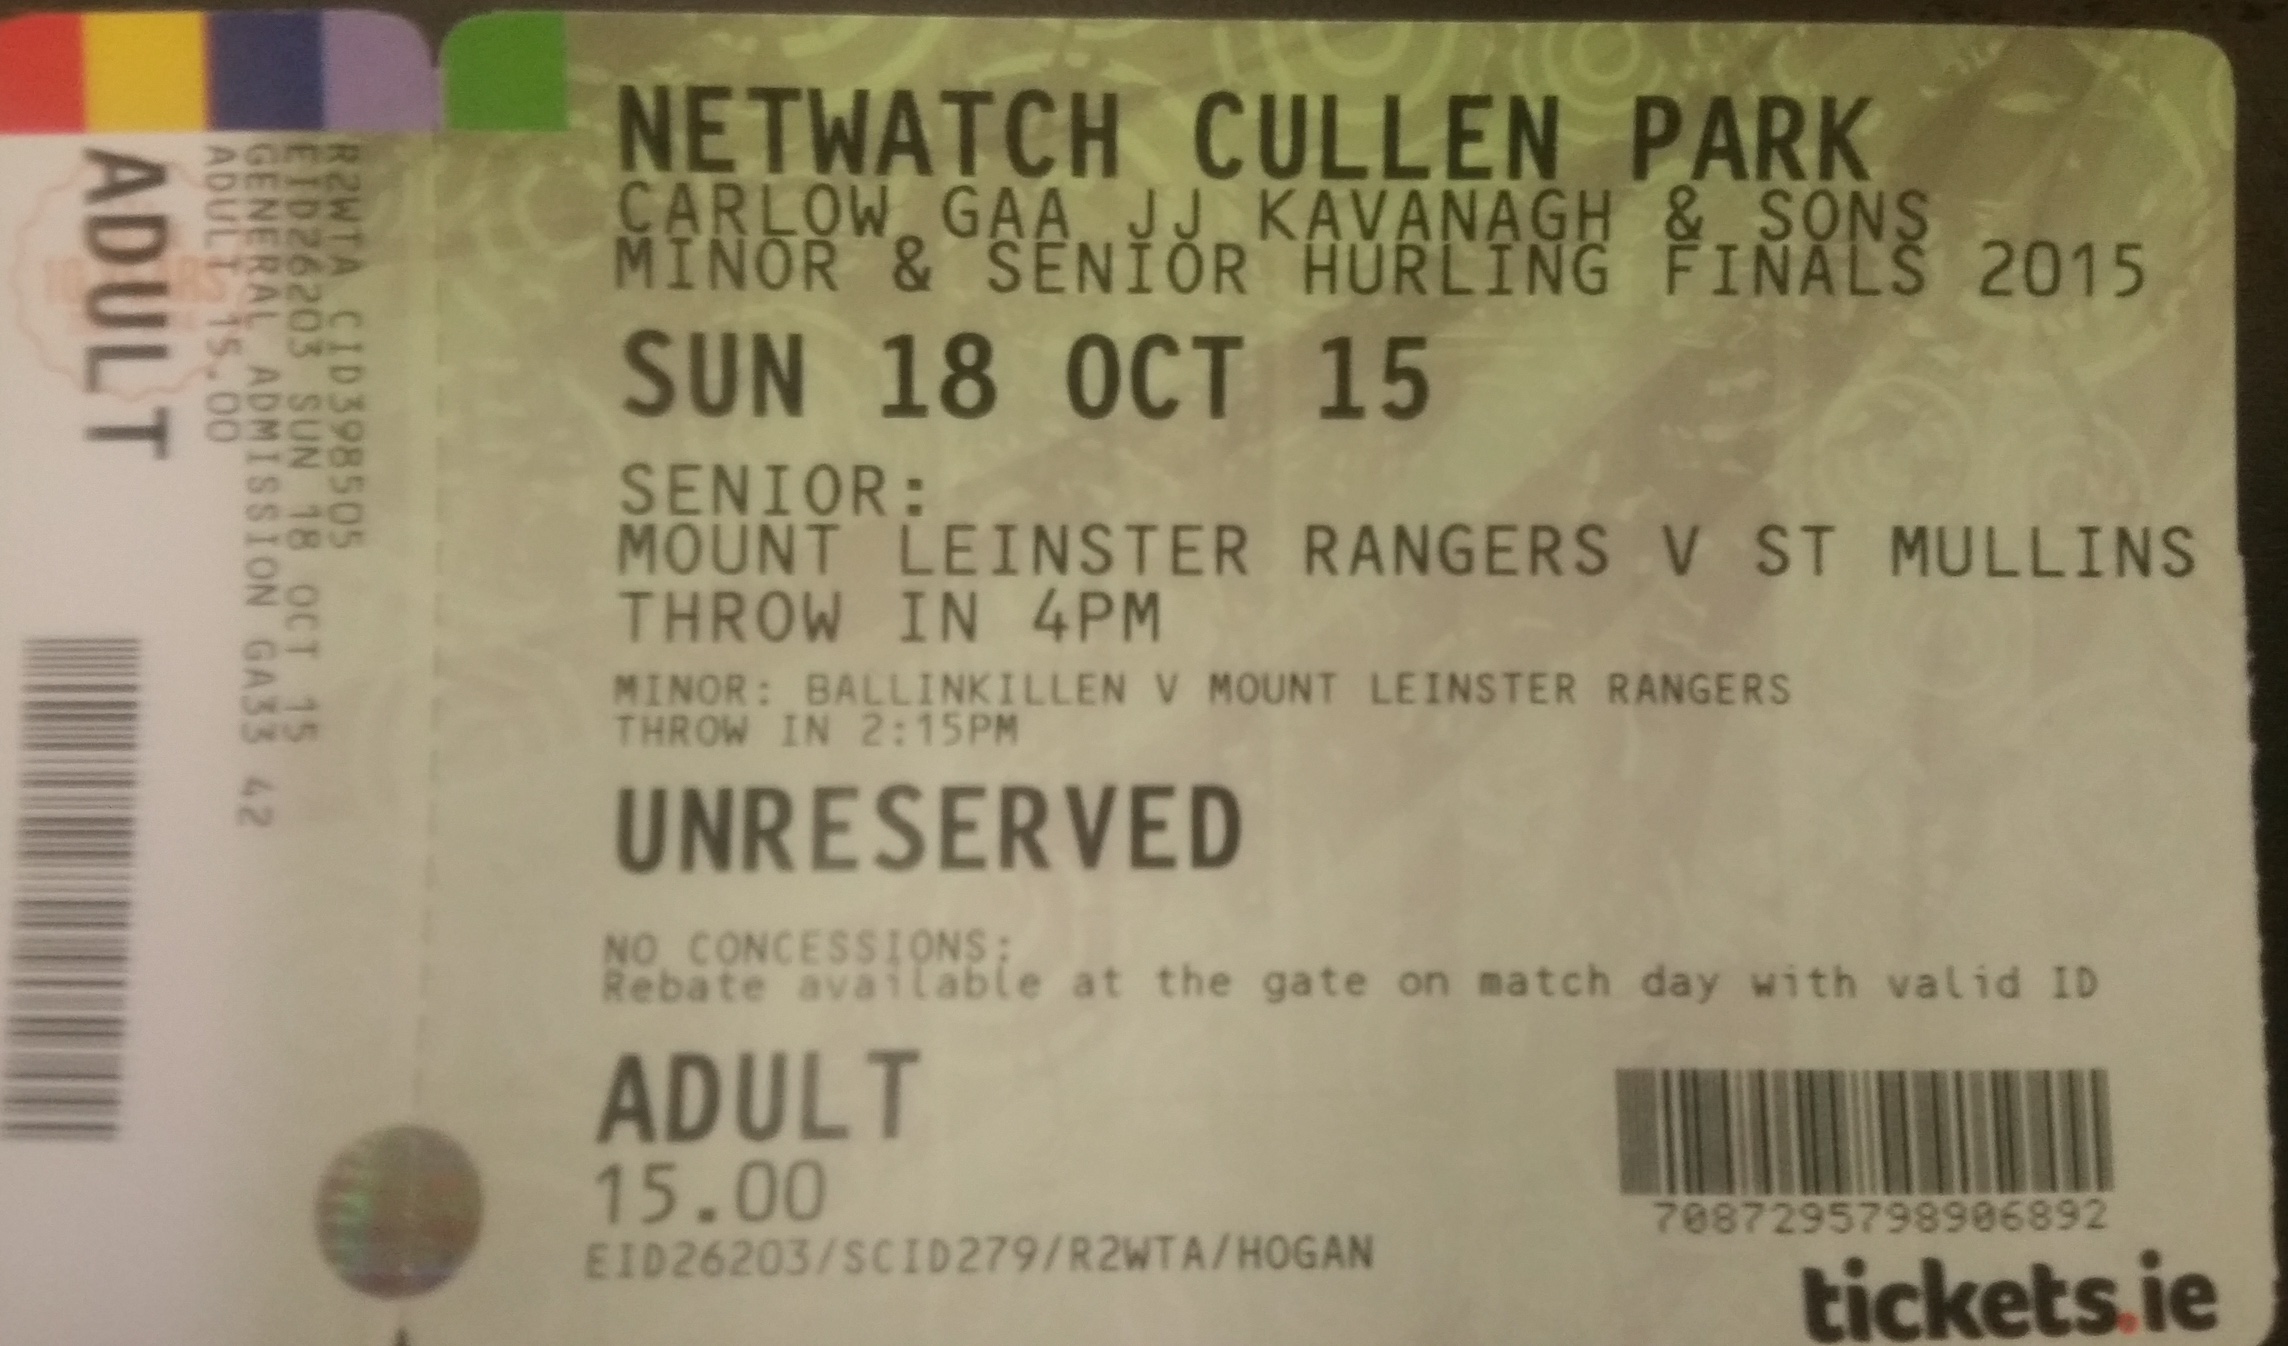 hurling tickets on sale now !!!